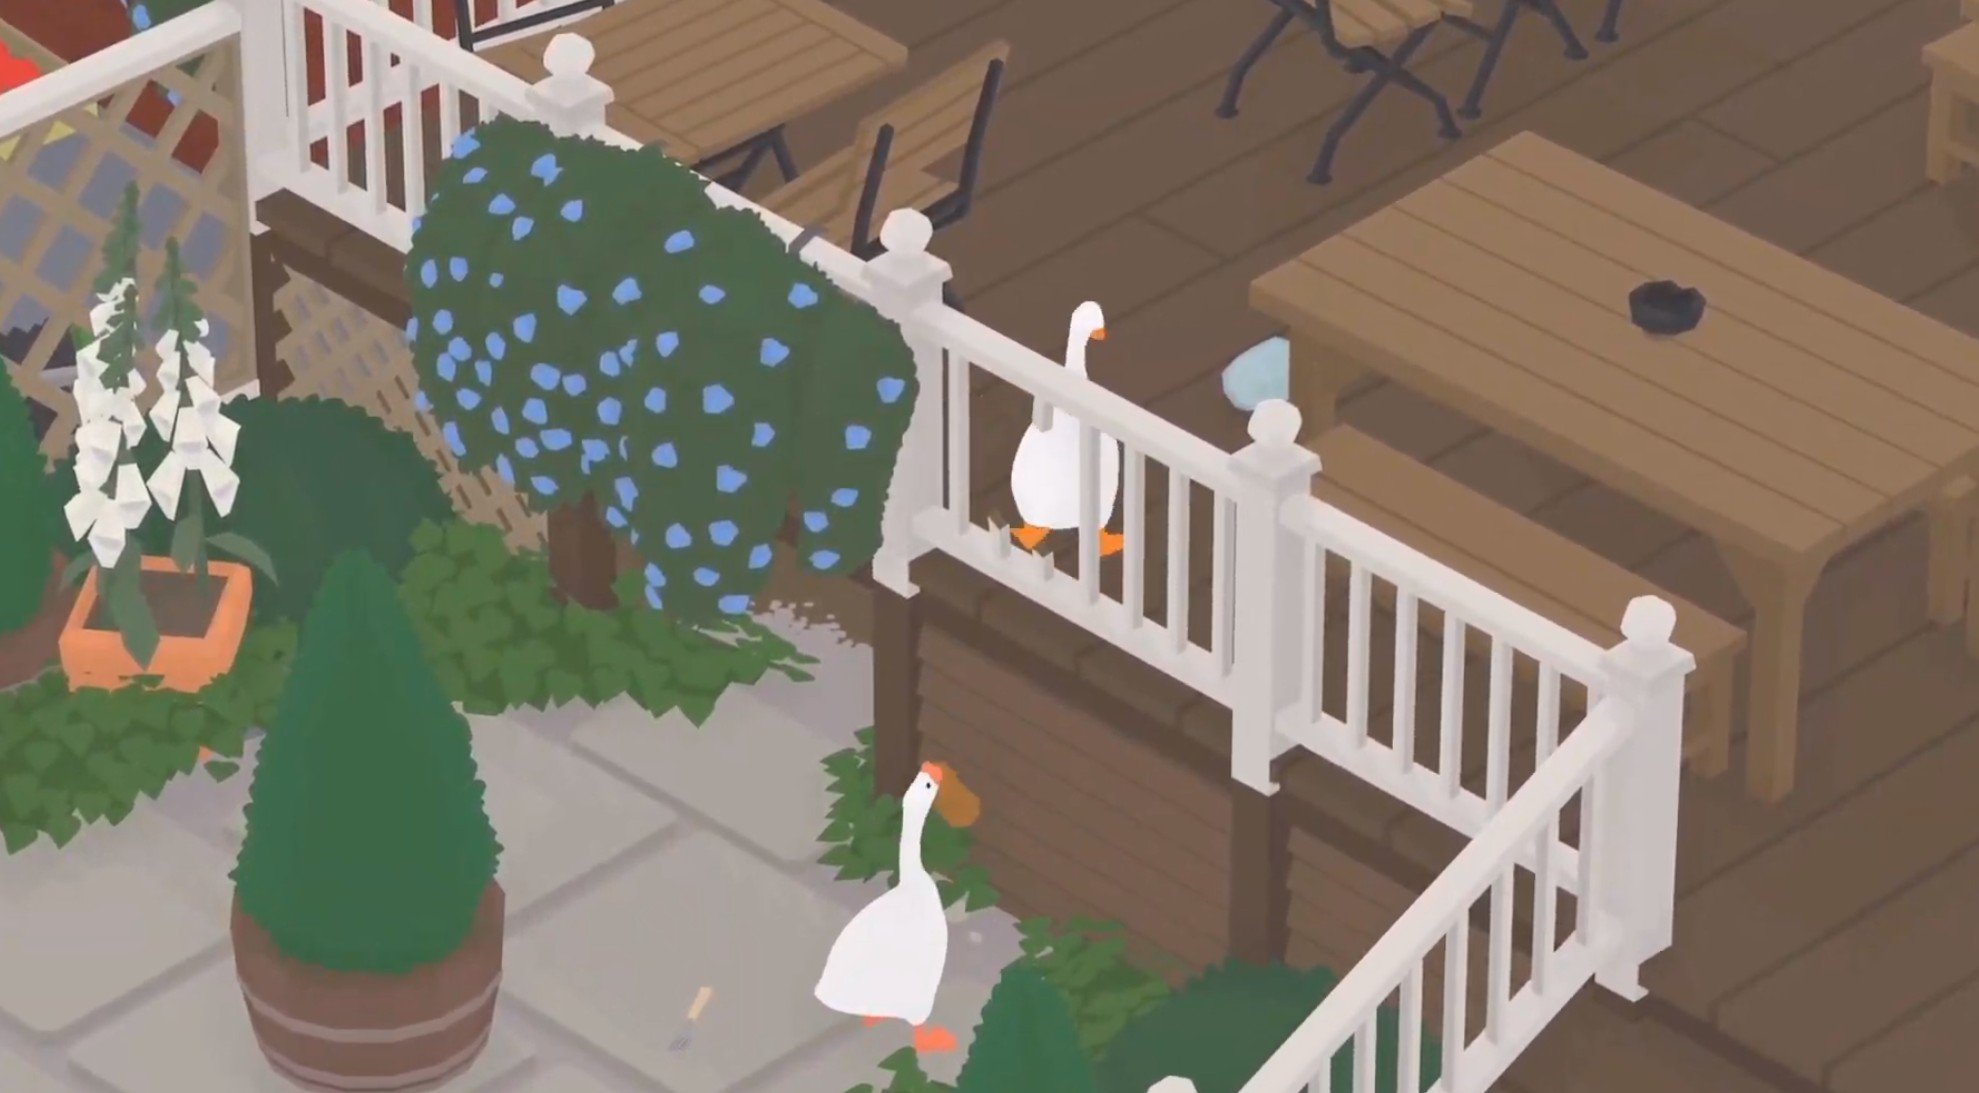 Untitled Goose Game - PS4 and Xbox One Announcement Trailer - Out